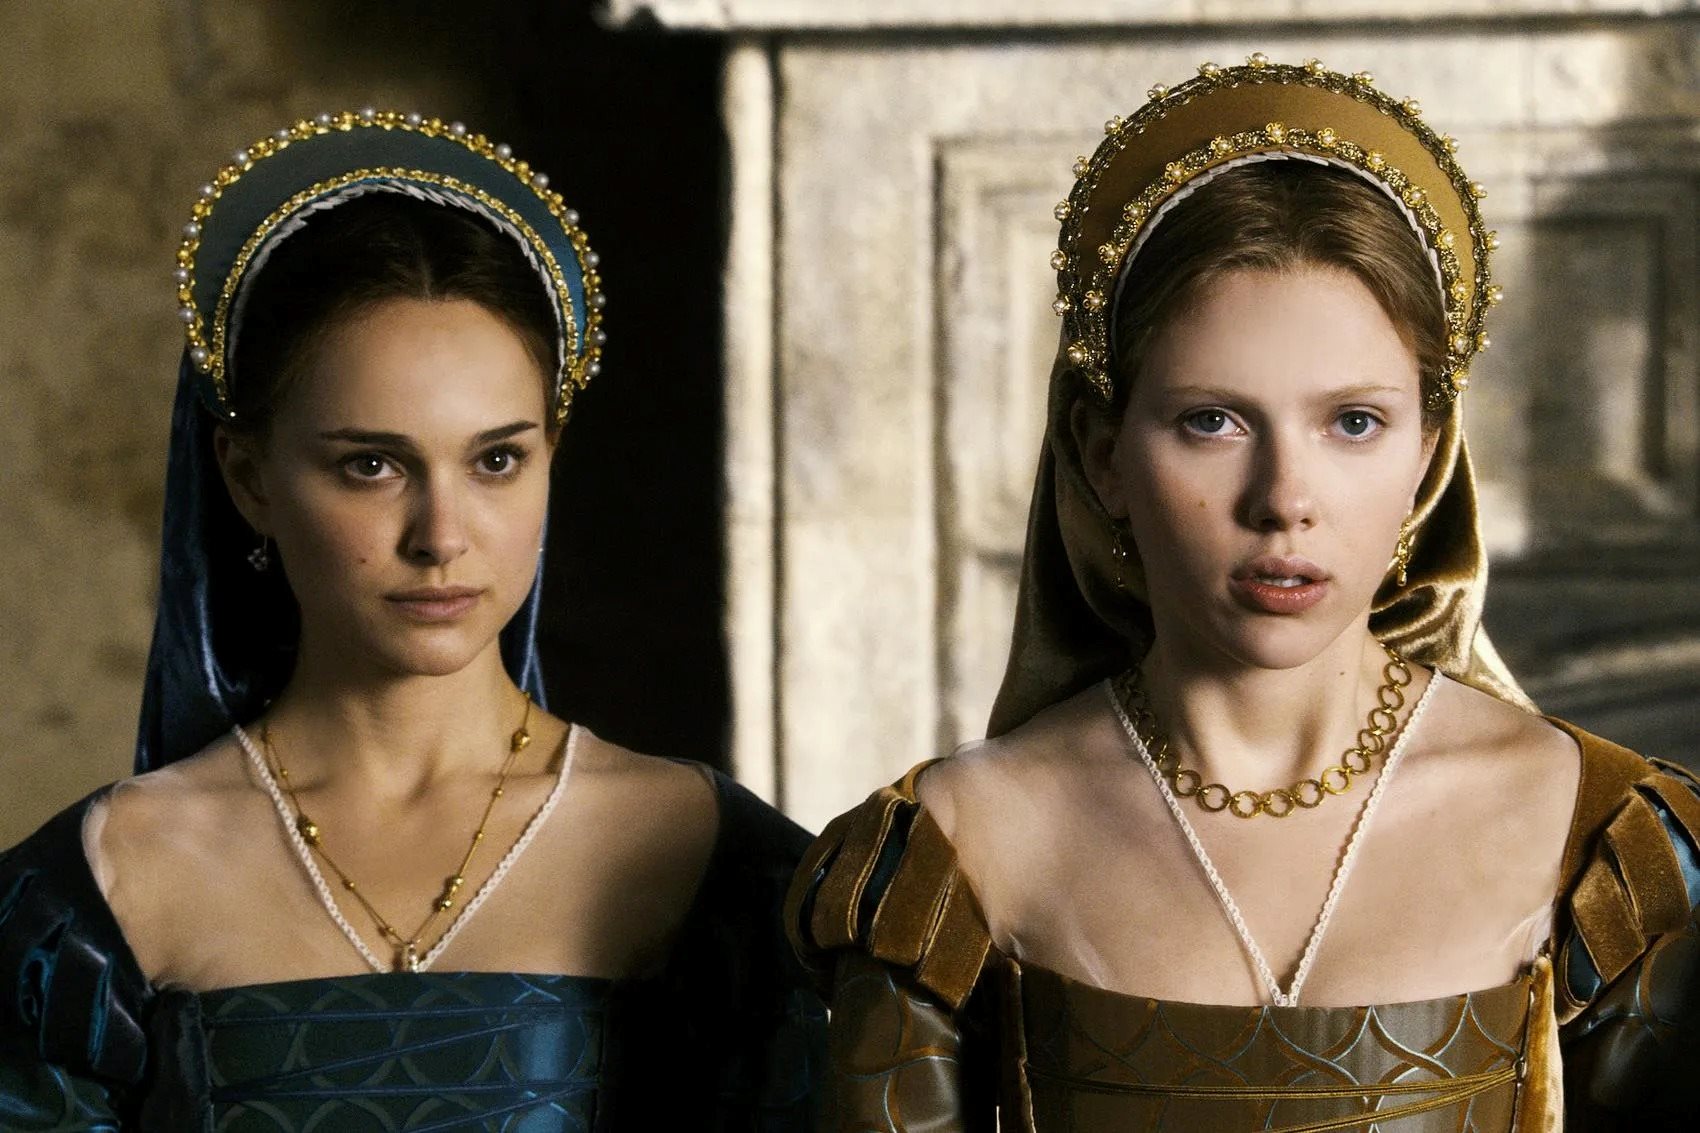 The Shocking Truth Behind ‘The Other Boleyn Girl’ Revealed: How Historically Accurate Was It?